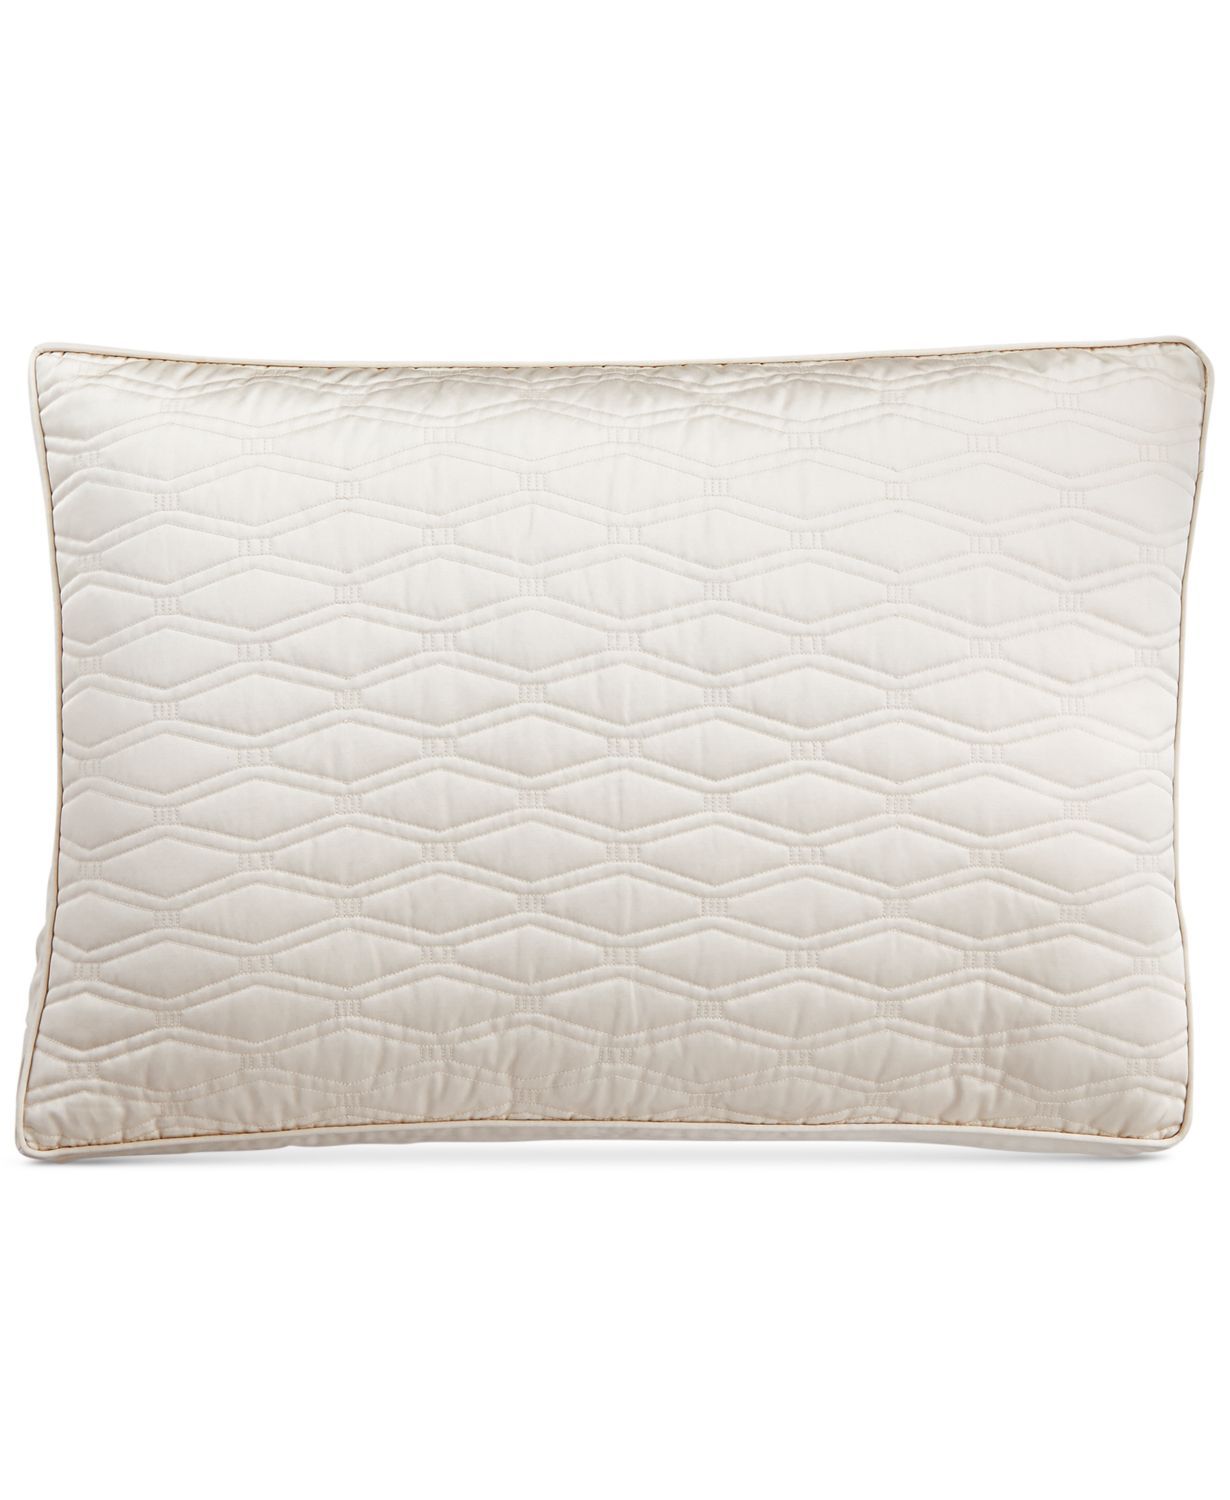 Woven Texture Quilted Standard Sham